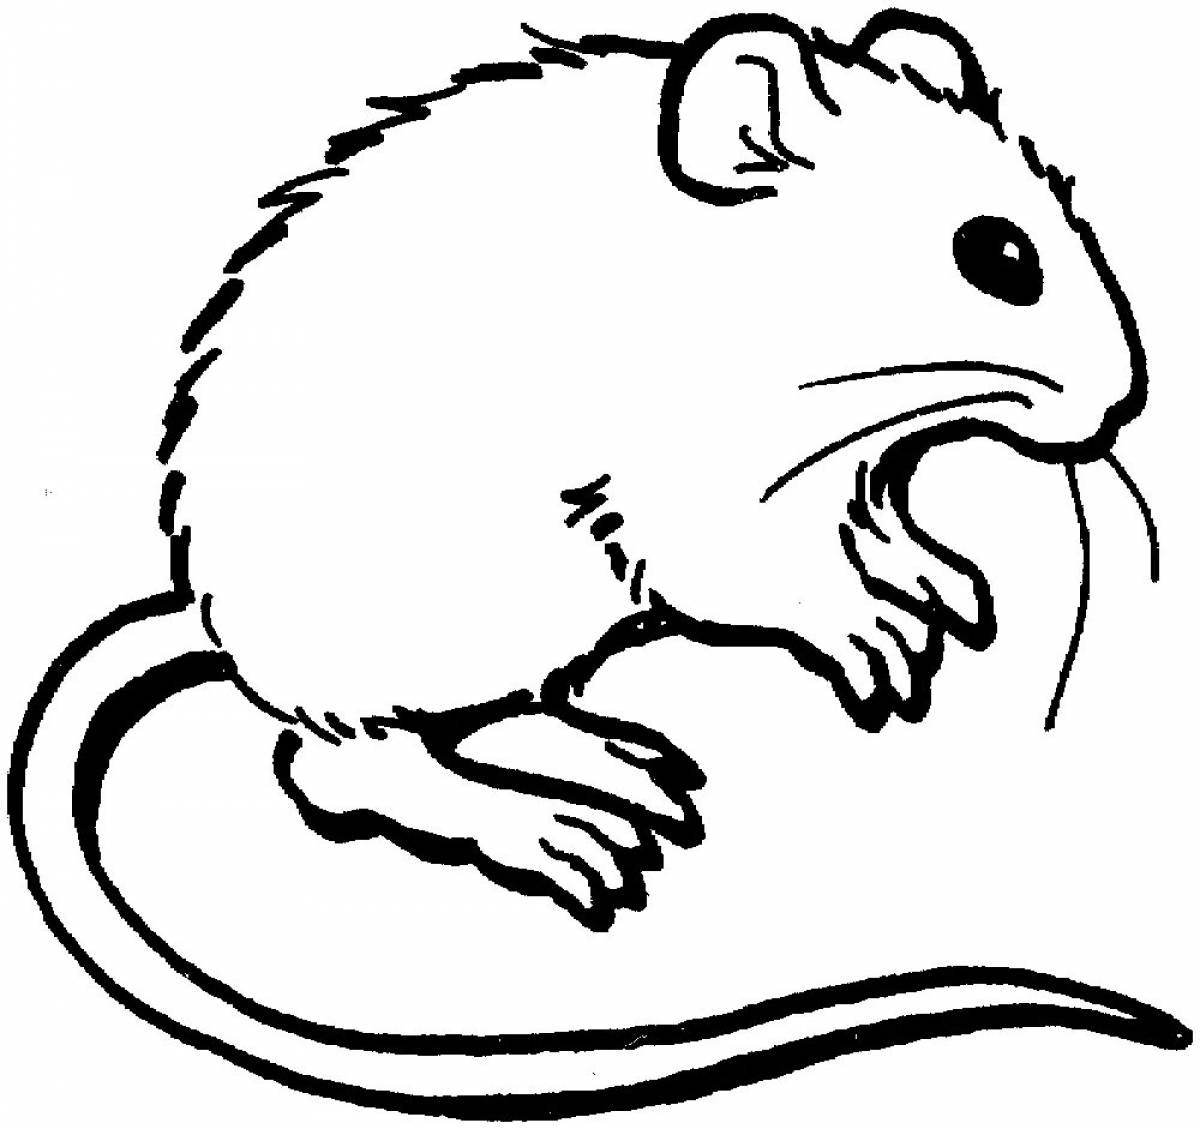 Cute mouse coloring book